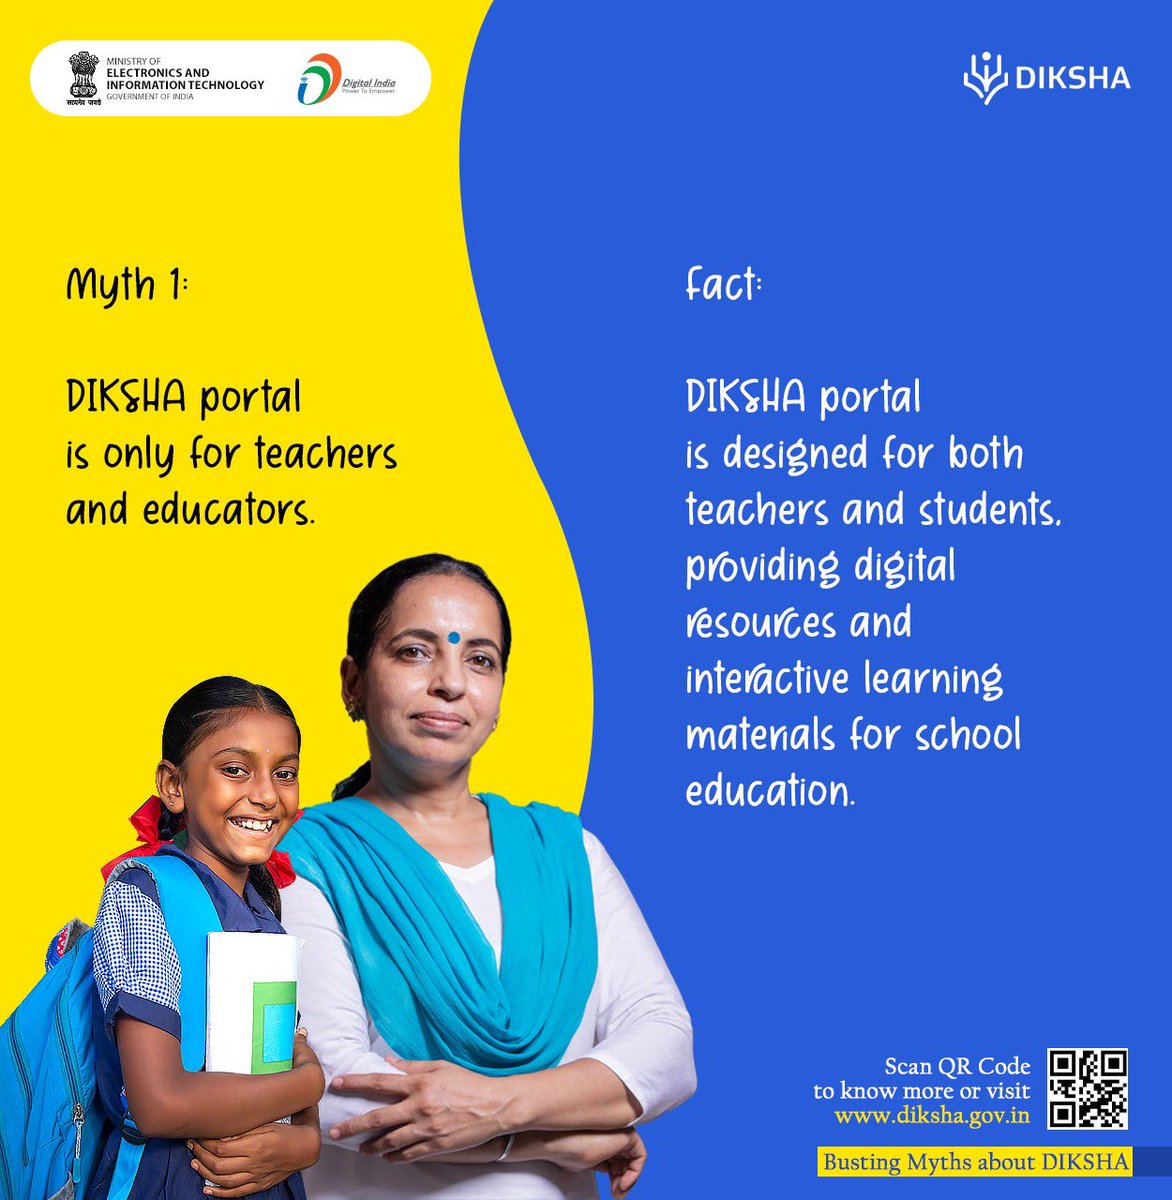 Did you know that DIKSHA portal was for both teachers and students? Explore a treasure trove of digital resources and interactive learning materials designed to enhance school education. For more info, visit: diksha.gov.in #DigitalIndia #eLearning @EduMinOfIndia